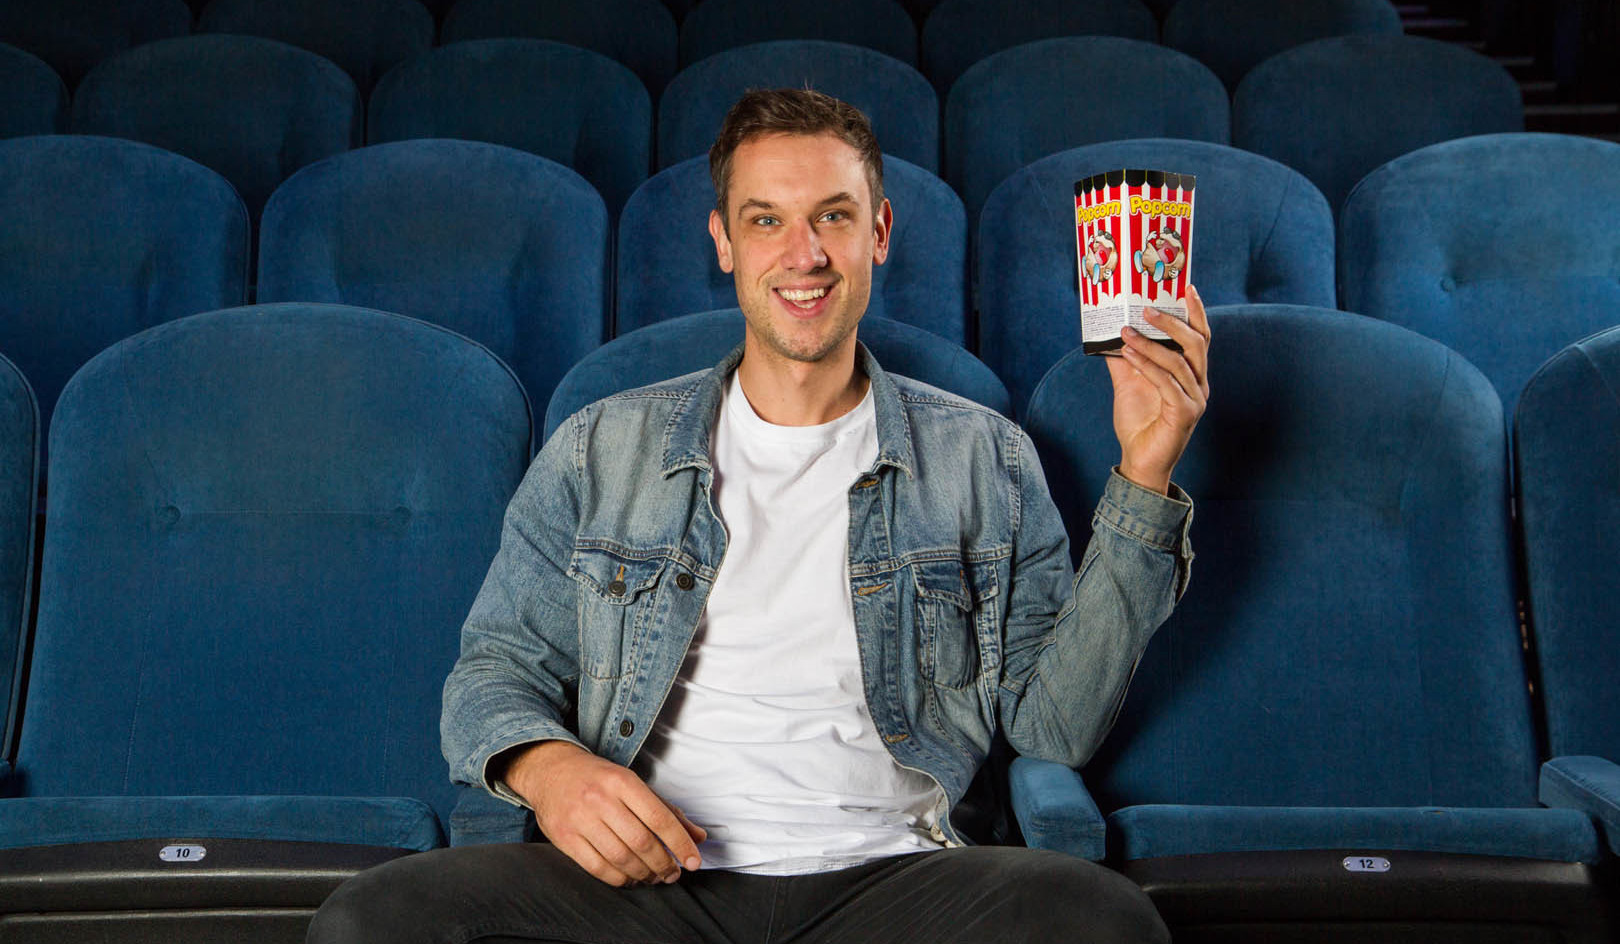 Man in cinema with popcorn